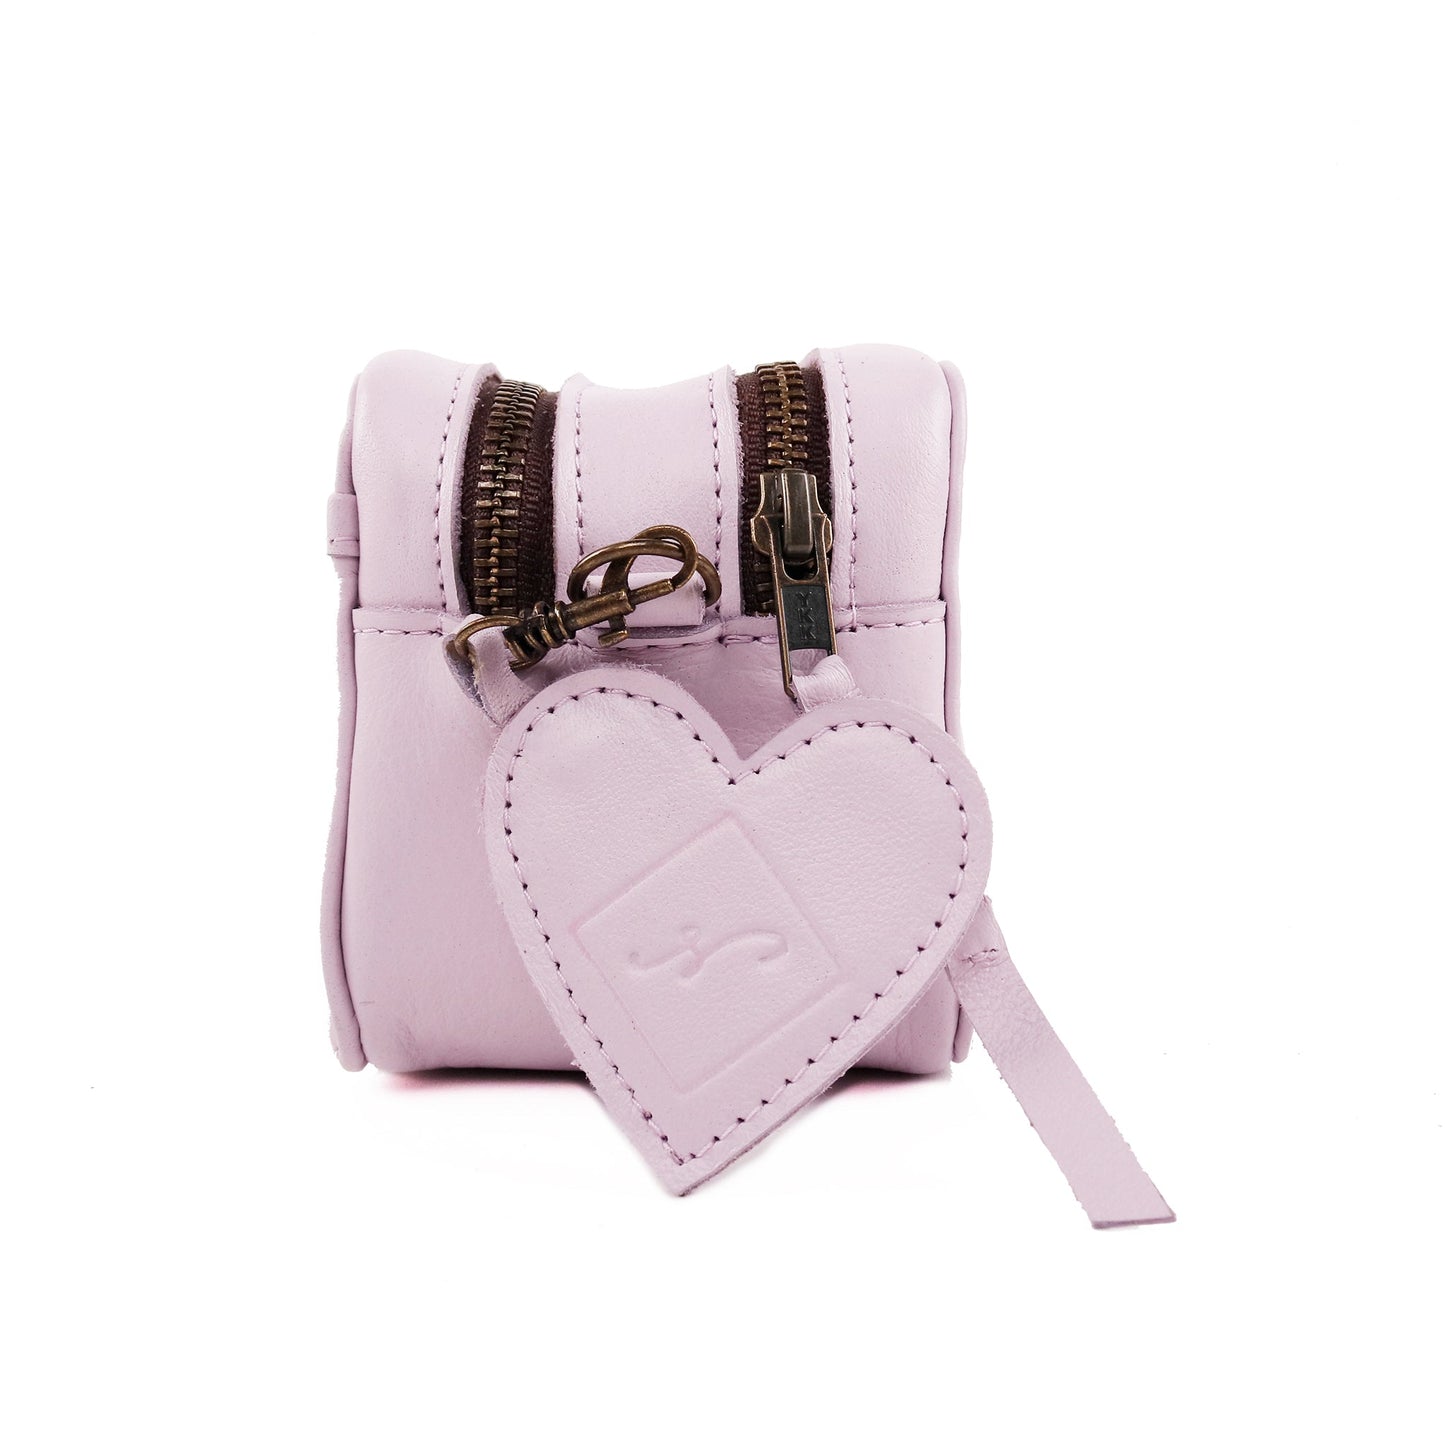 ESSENTIALS BAG - FULL LEATHER COLLECTION - LAVENDER